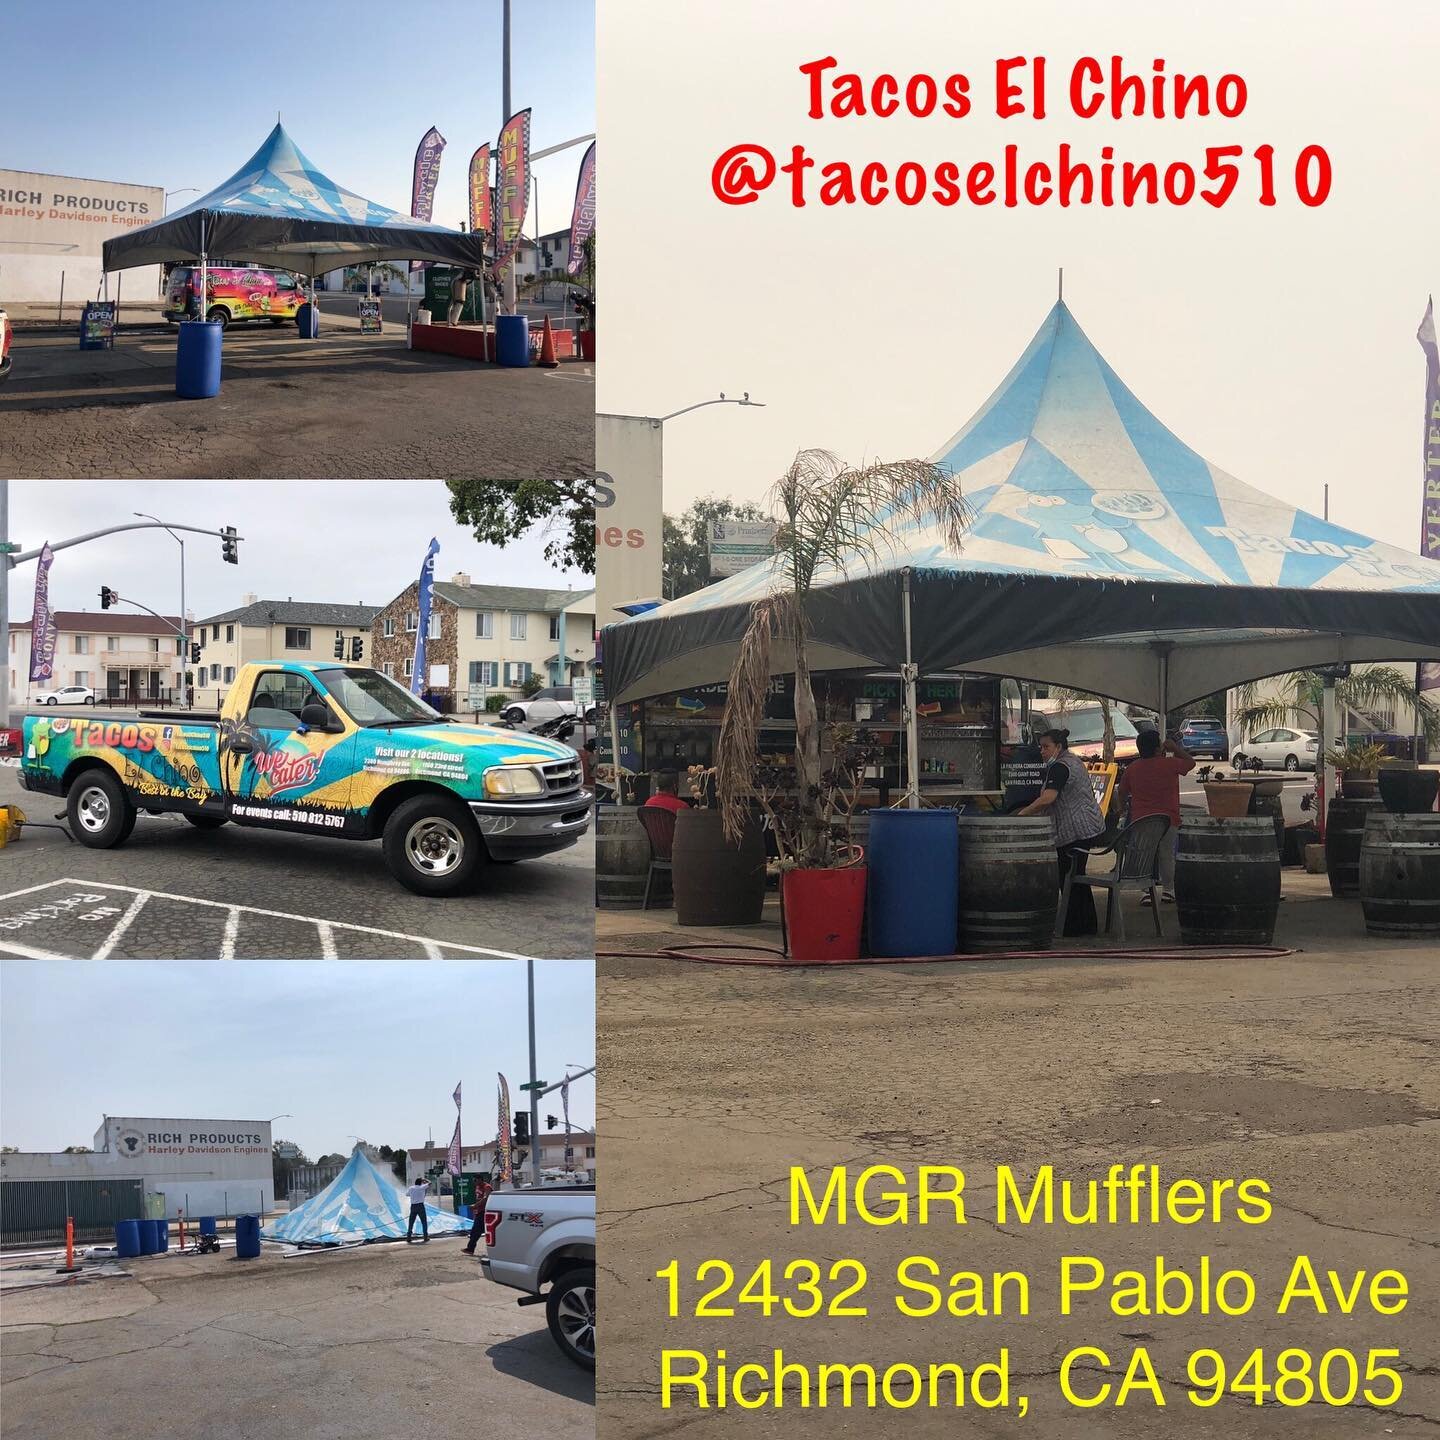 We are proud to announce that @tacoselchino510 is now in our shop location!  Enjoy some delicious tacos while your vehicle gets repaired!  Great food, good quality, great service!  Don&rsquo;t just take it from us, come try it out!